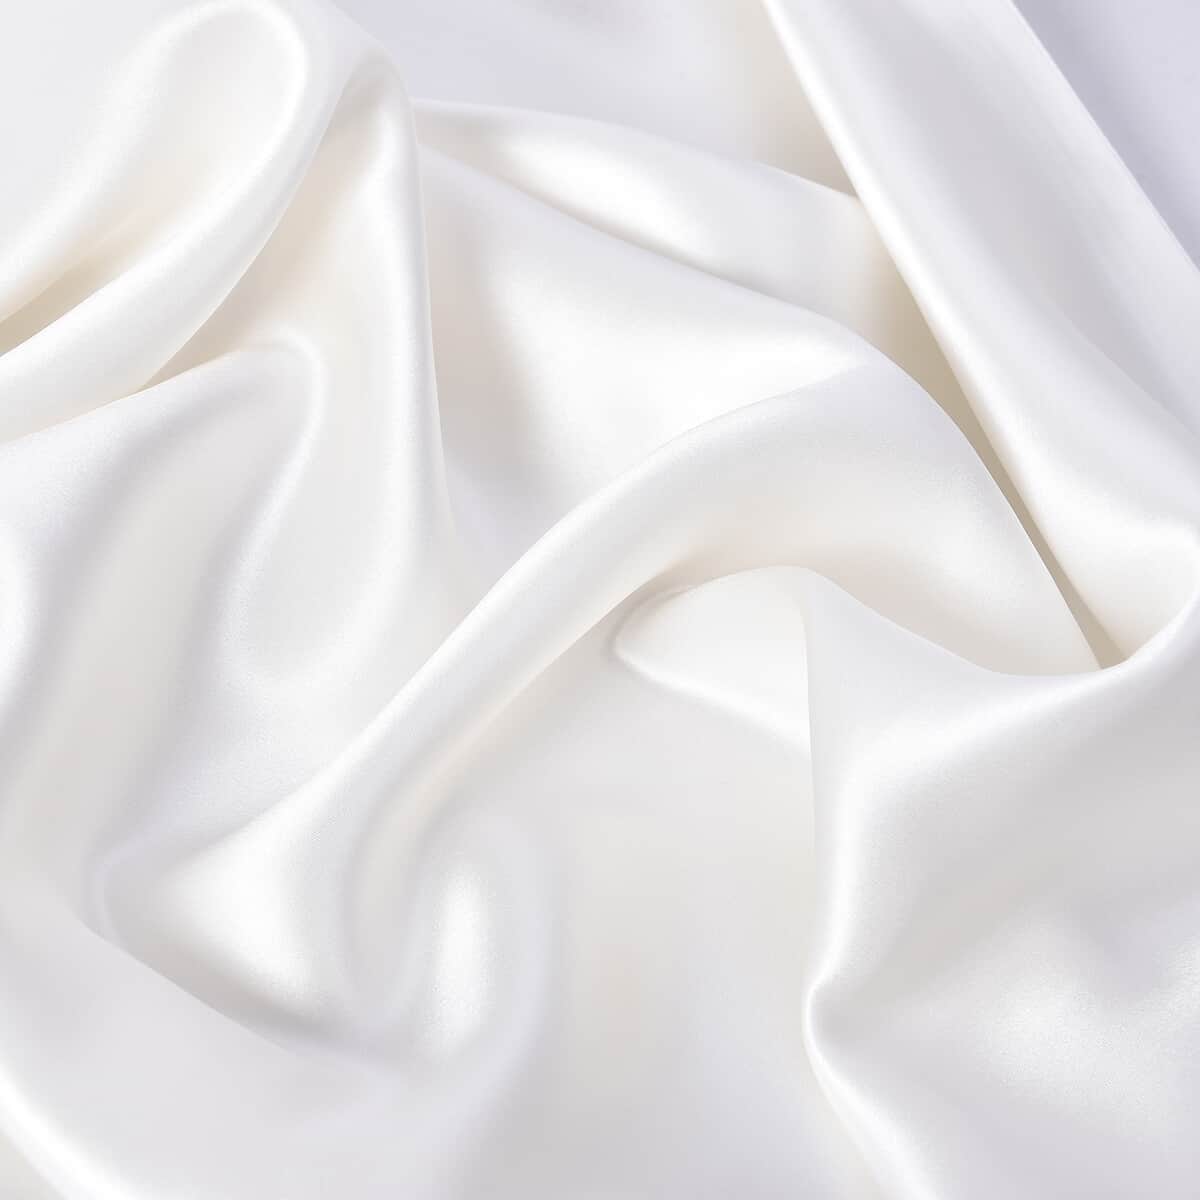 Symphony Home Ivory 100% Mulberry Silk Pillowcase Infused with Hyaluronic Acid & Argan Oil -Full (20x26) image number 3